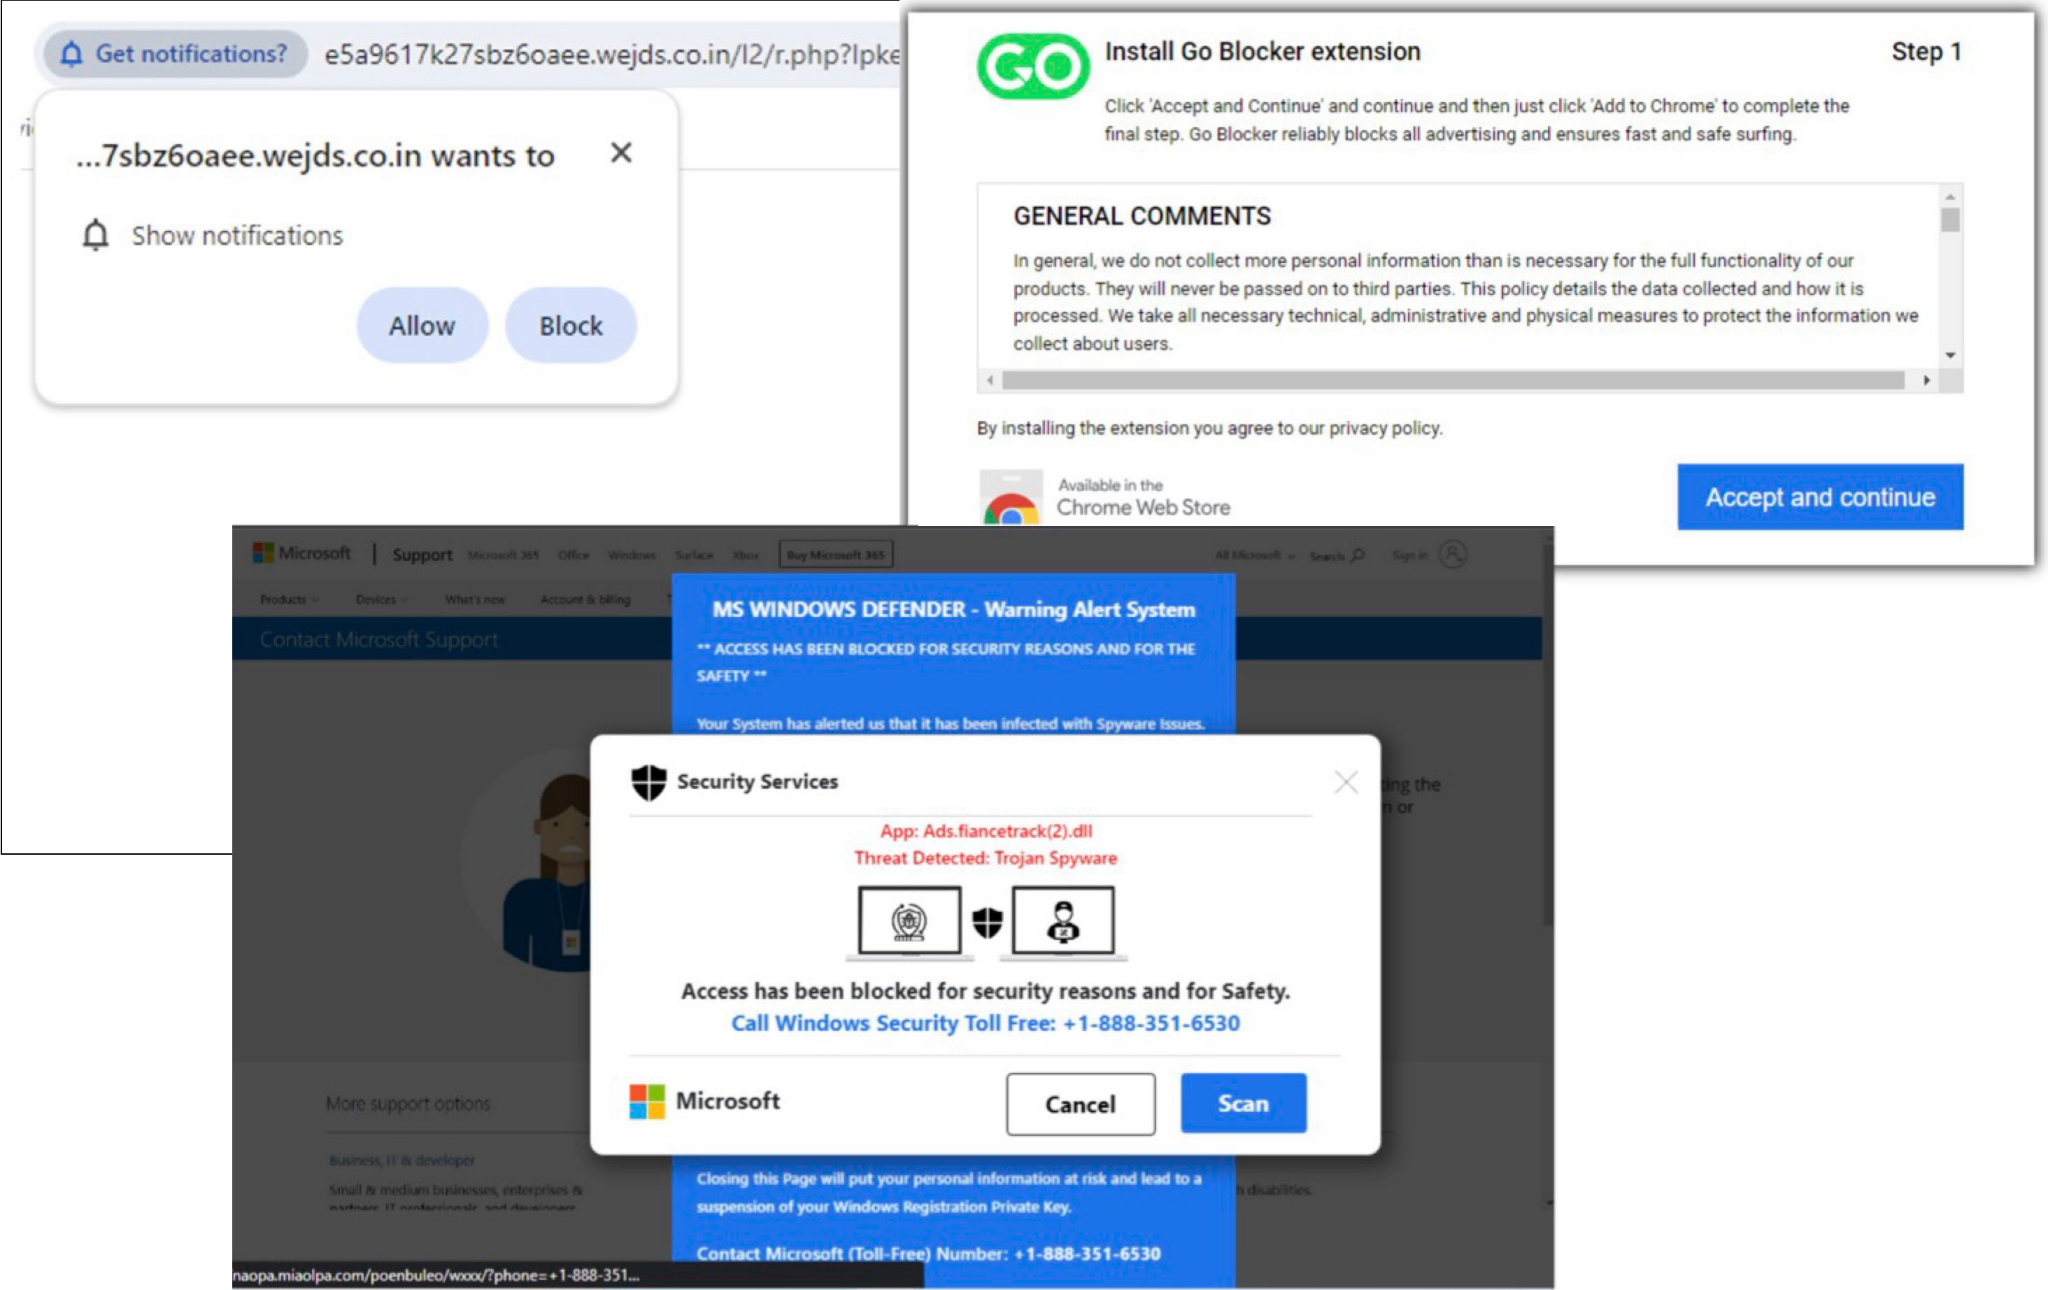 Image 8 is a collection of three screenshots. Clockwise from left to right: Get notifications popup with options to Allow or Block. Popup window for Go Blocker extension. Includes logo, General Comments, and Accept and continue button. Microsoft Services popup against a MS WINDOWS DEFENDER warning alert. Threat detected: Trojan spyware. Access has been blocked for security reasons and safety. Cancel and Scan options. 